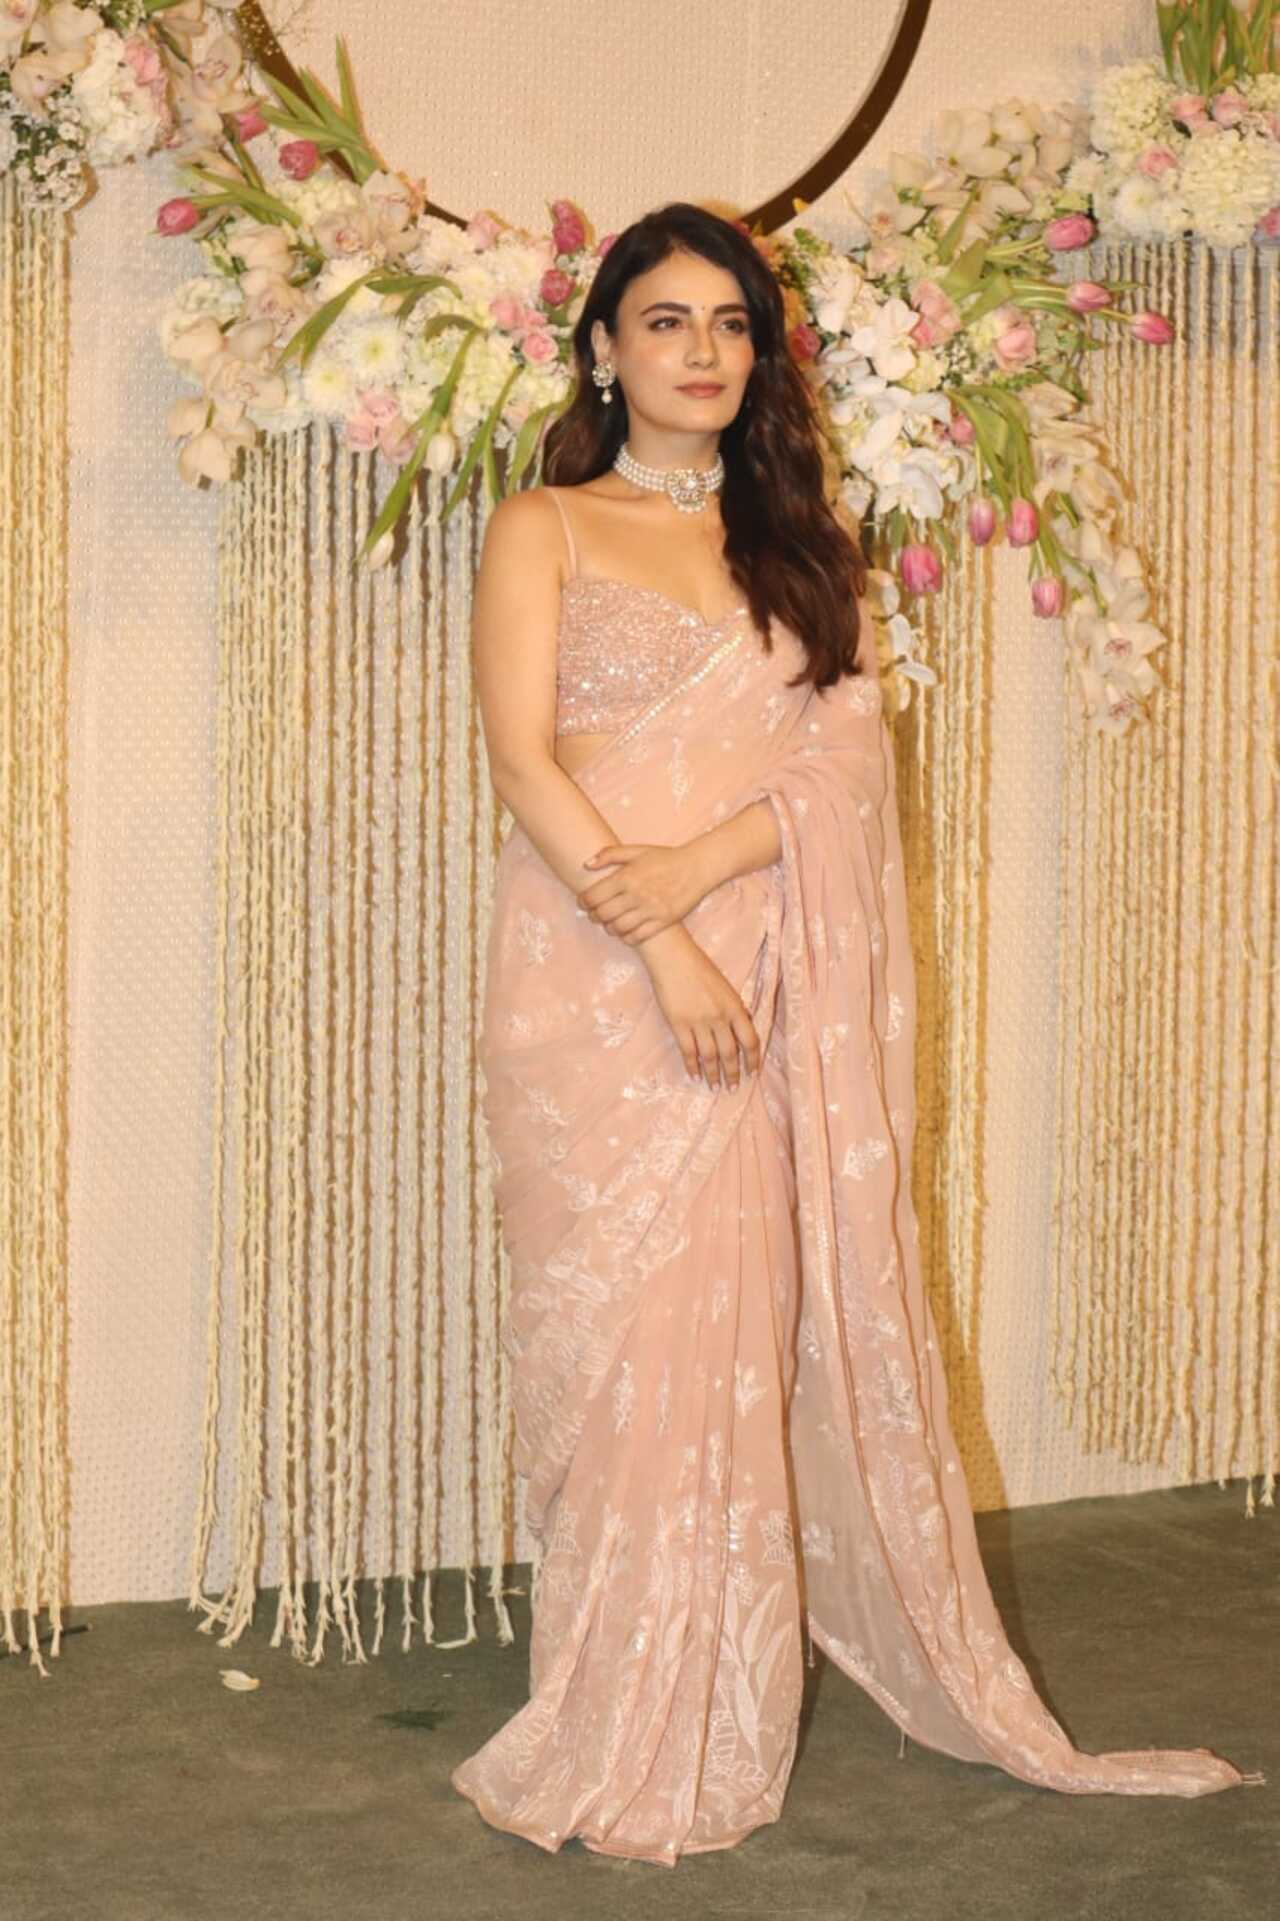 Radhika Madan also opted for a pastel saree like her 'Sajini Shinde Ka Viral Video' co-star Nimrat Kaur. She completed the look with a diamond choker necklace